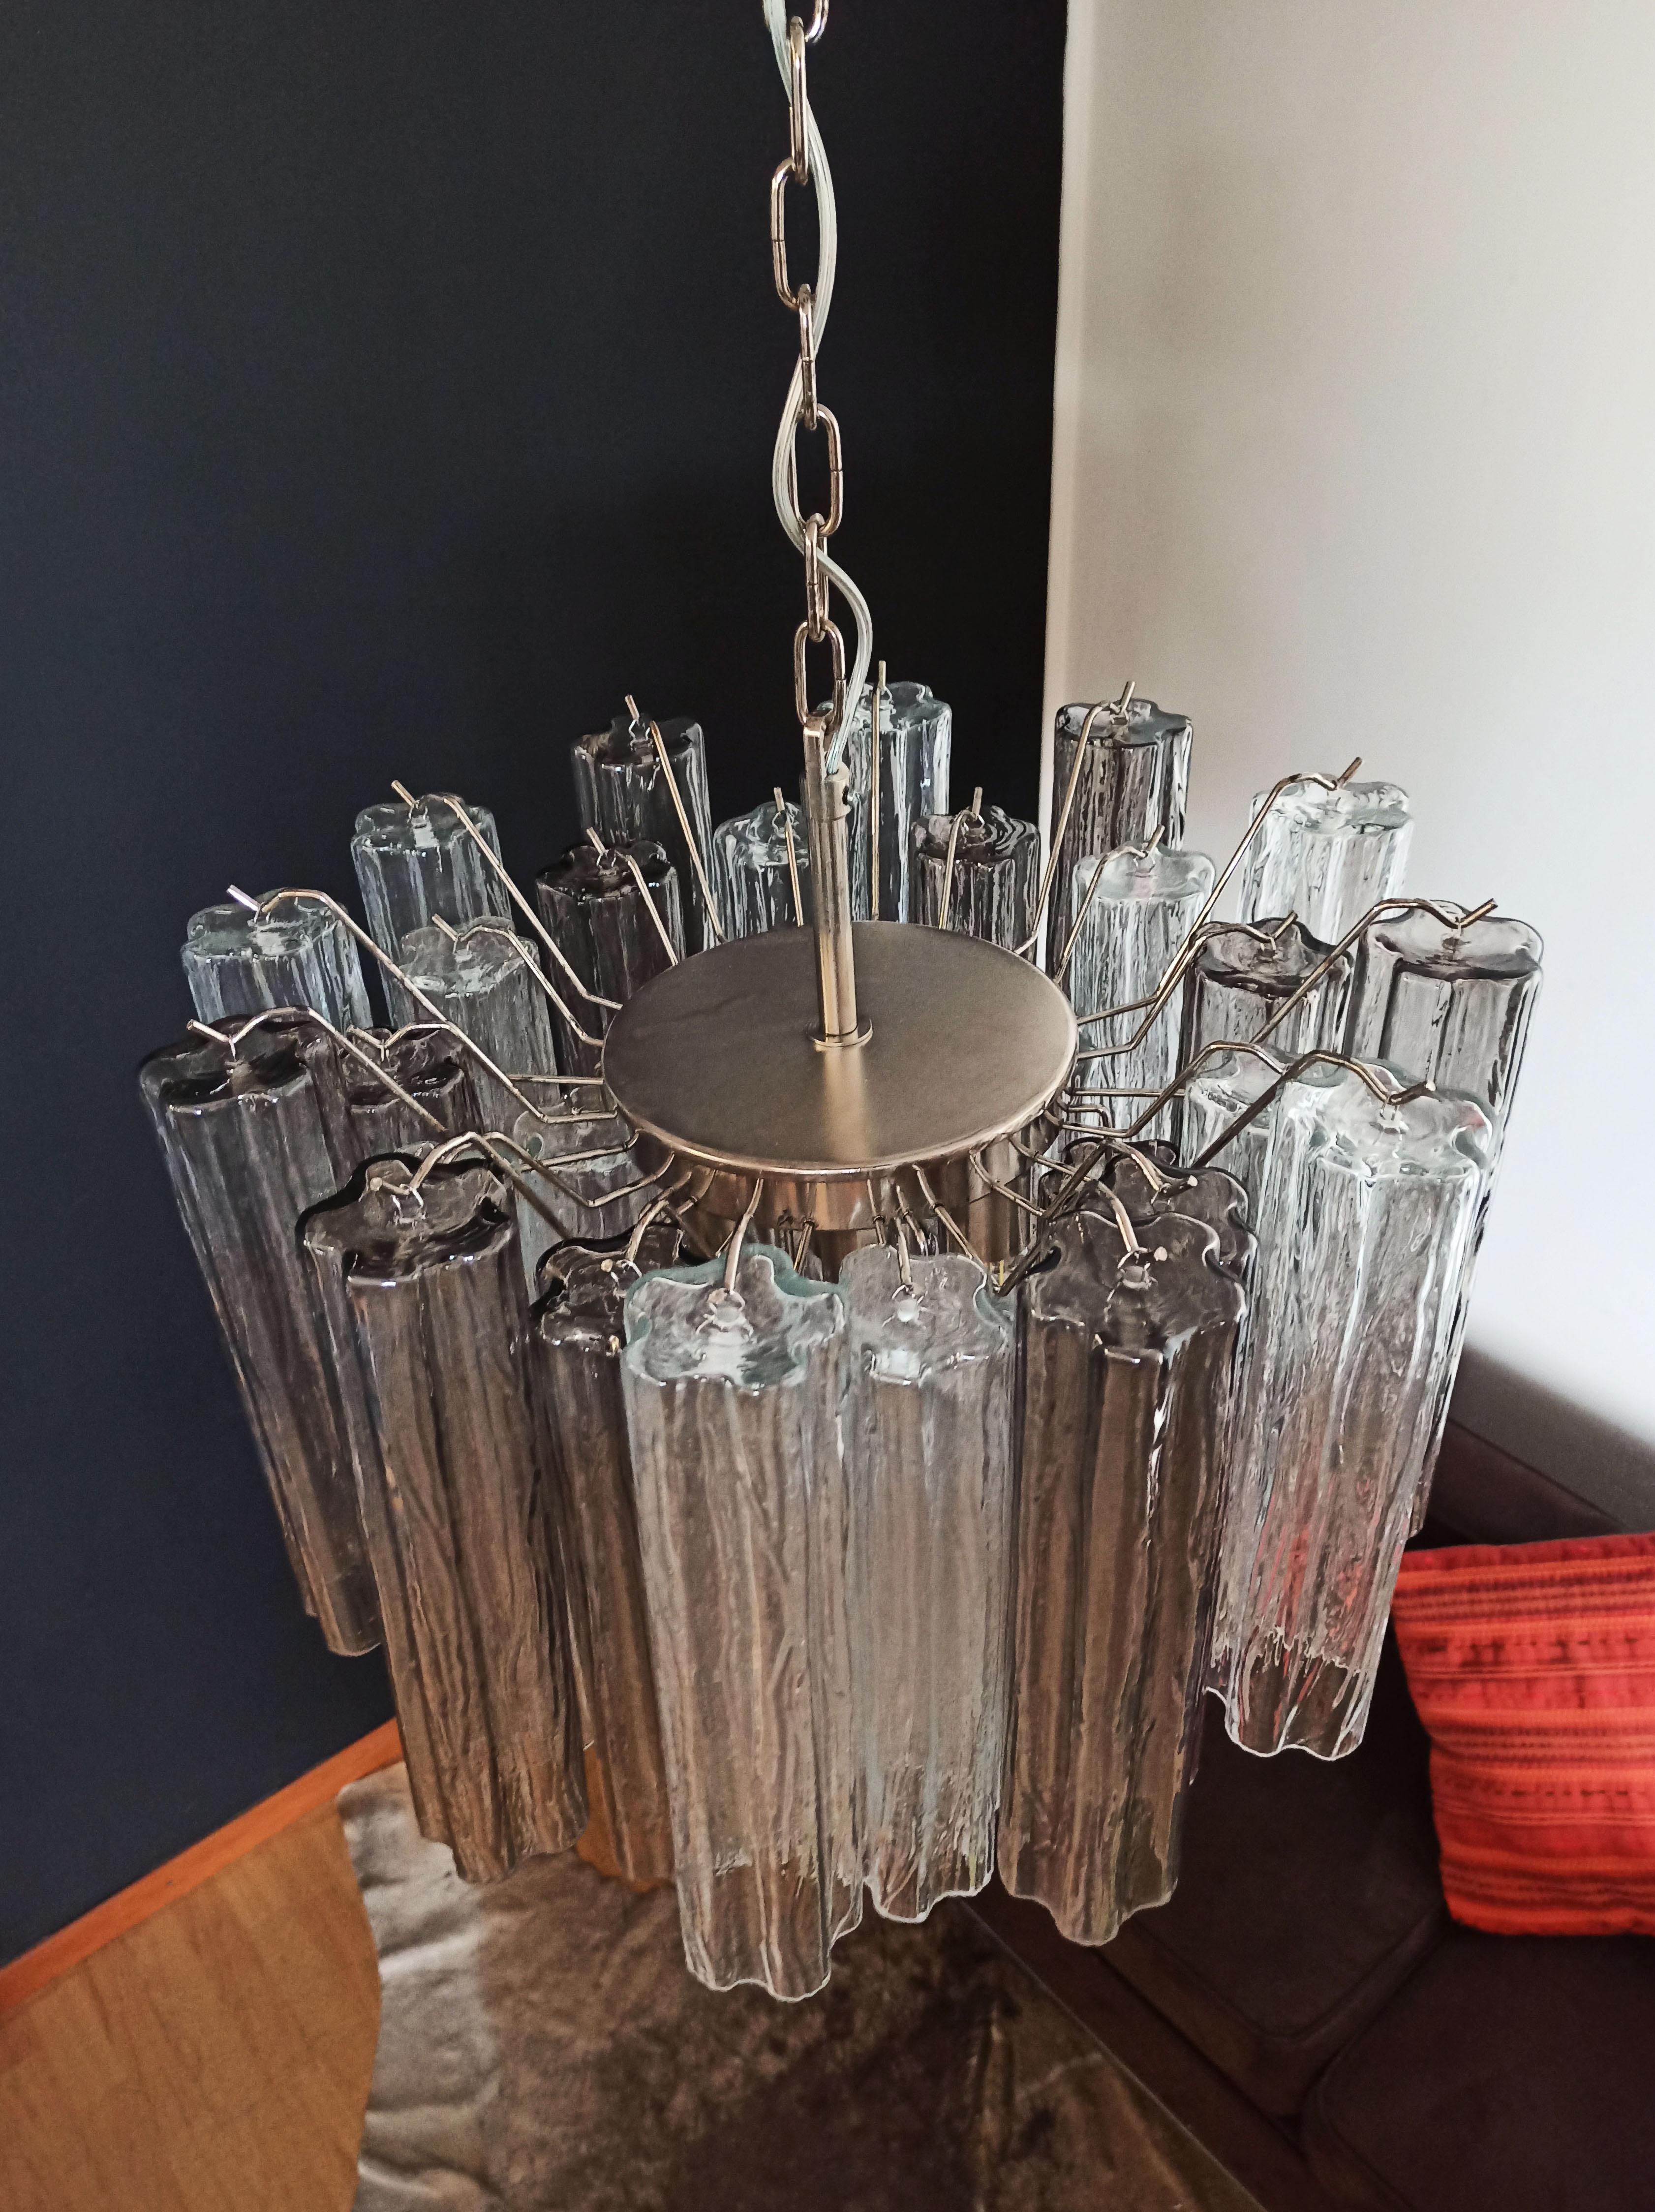 Fantastic Murano Glass Tube Chandelier - 36 smoked and clear glass tube For Sale 2